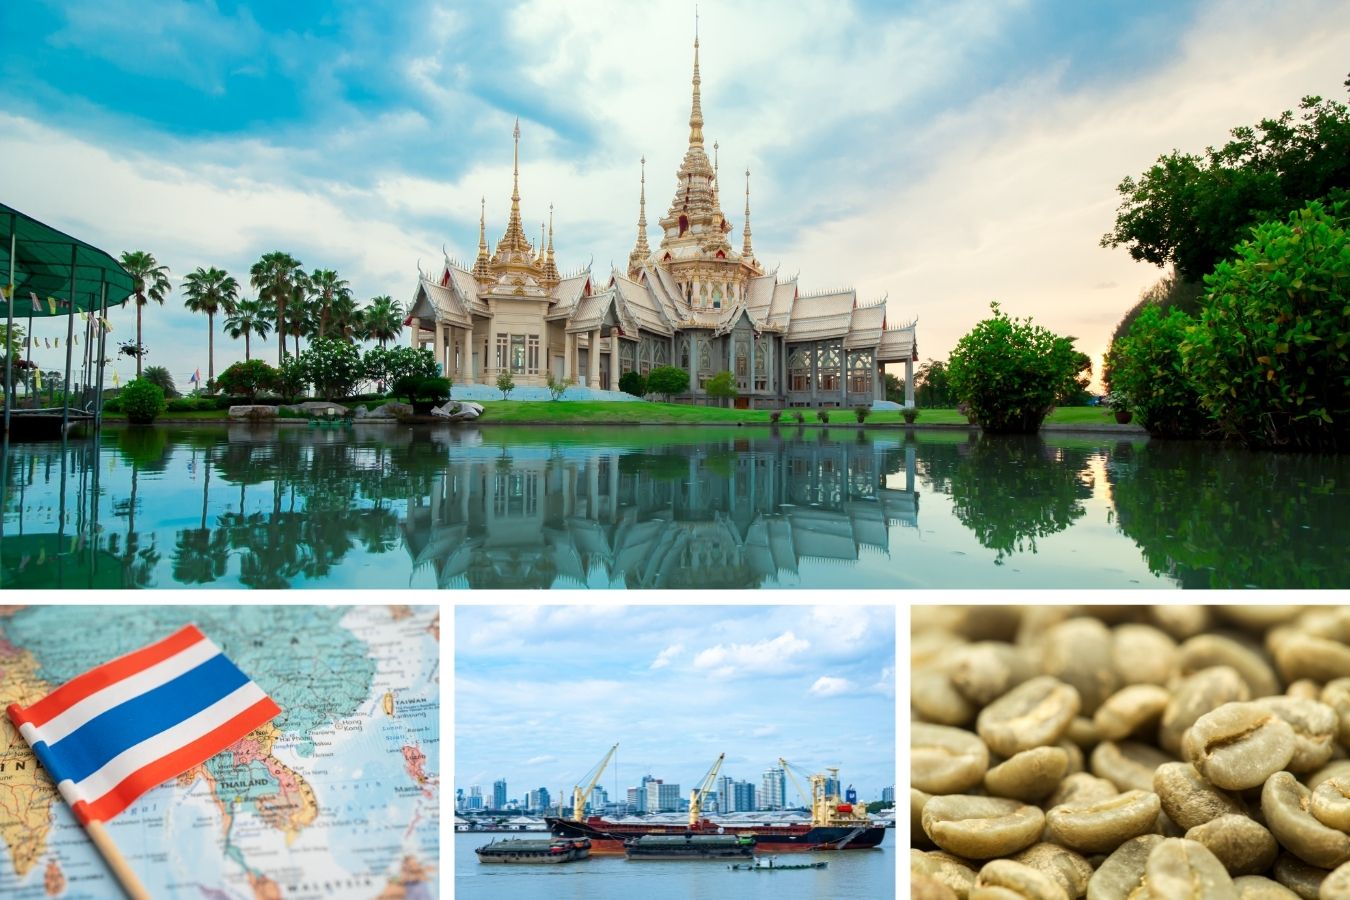 How to Export and Import Coffee to Thailand? - Helena Coffee Vietnam